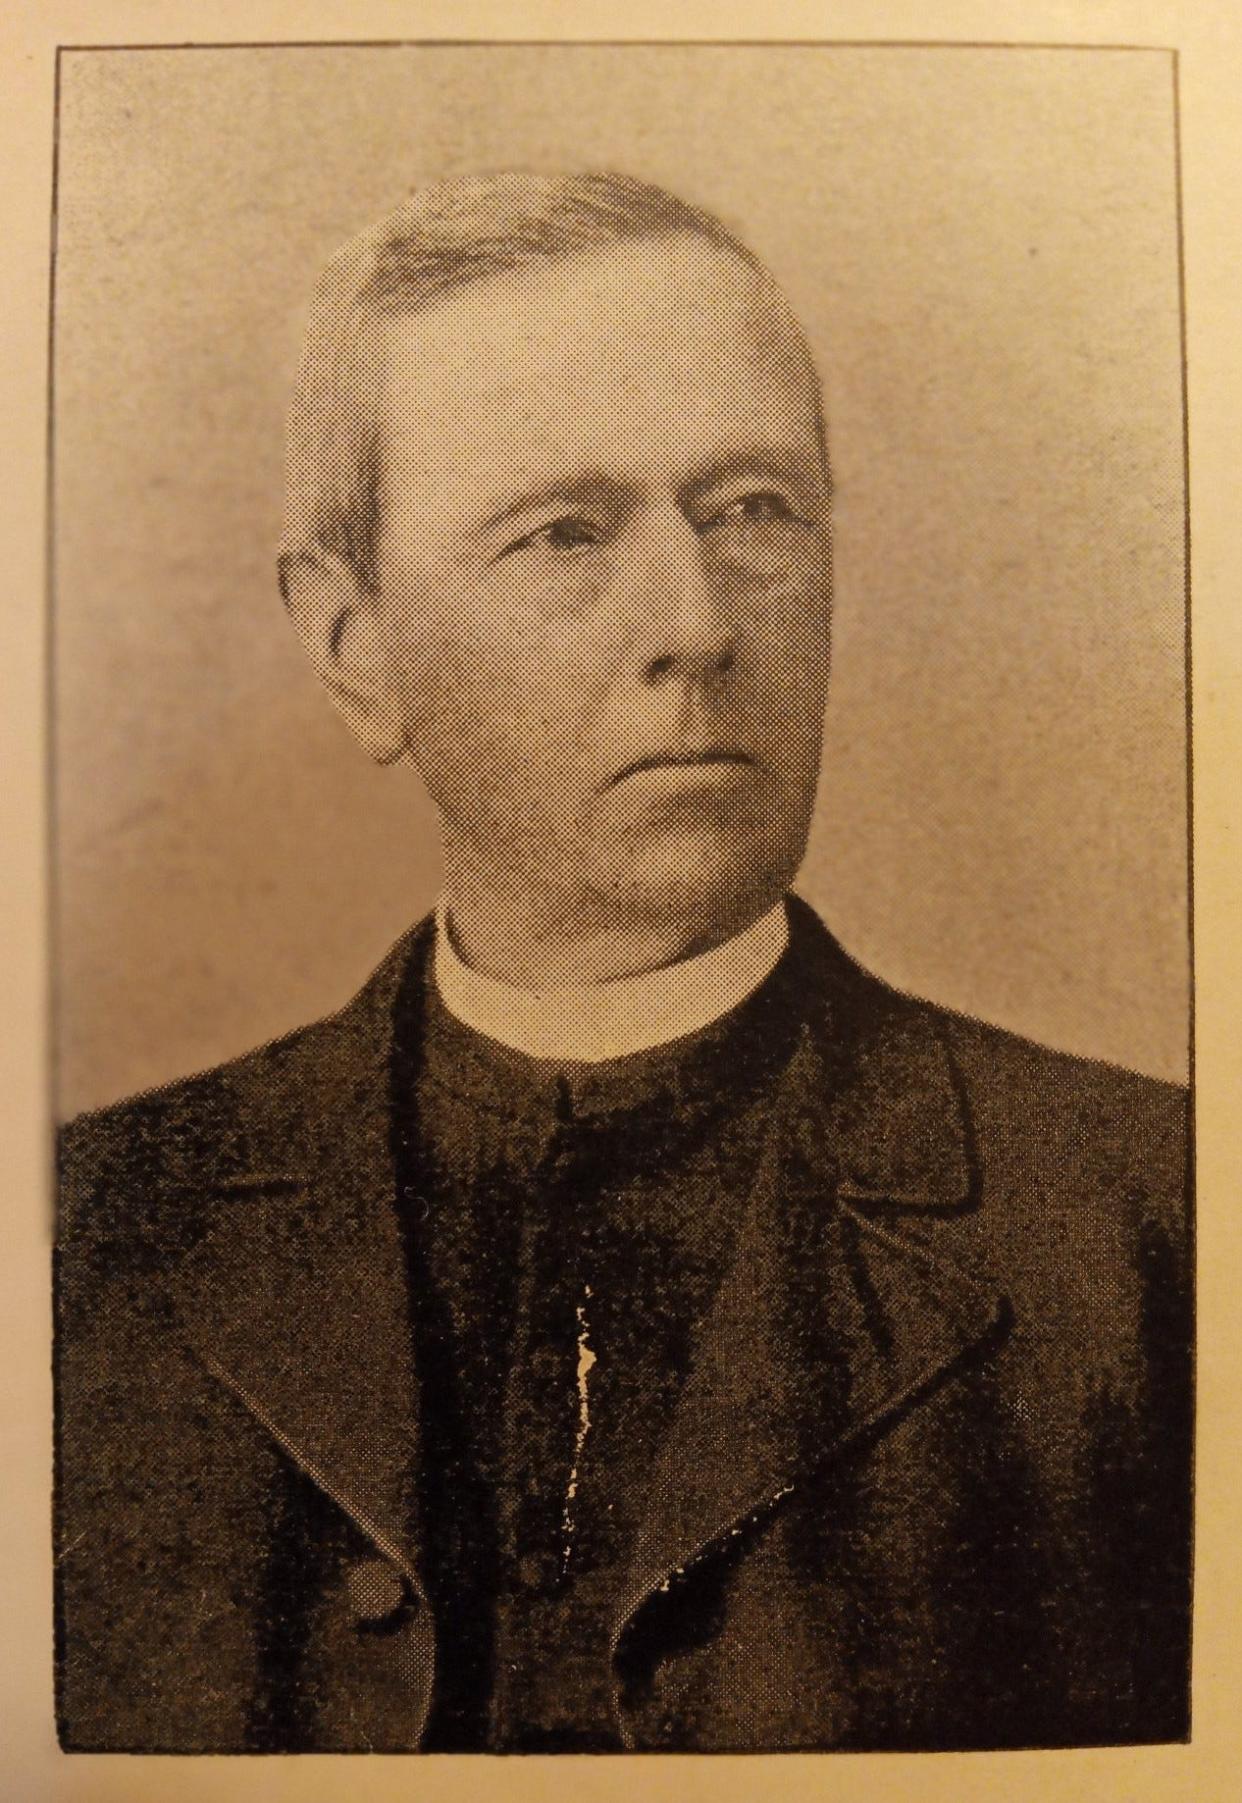 Rev. John J. Doherty served at St. John the Evangelist Parish in Honesdale from 1859 to his death in 1896.